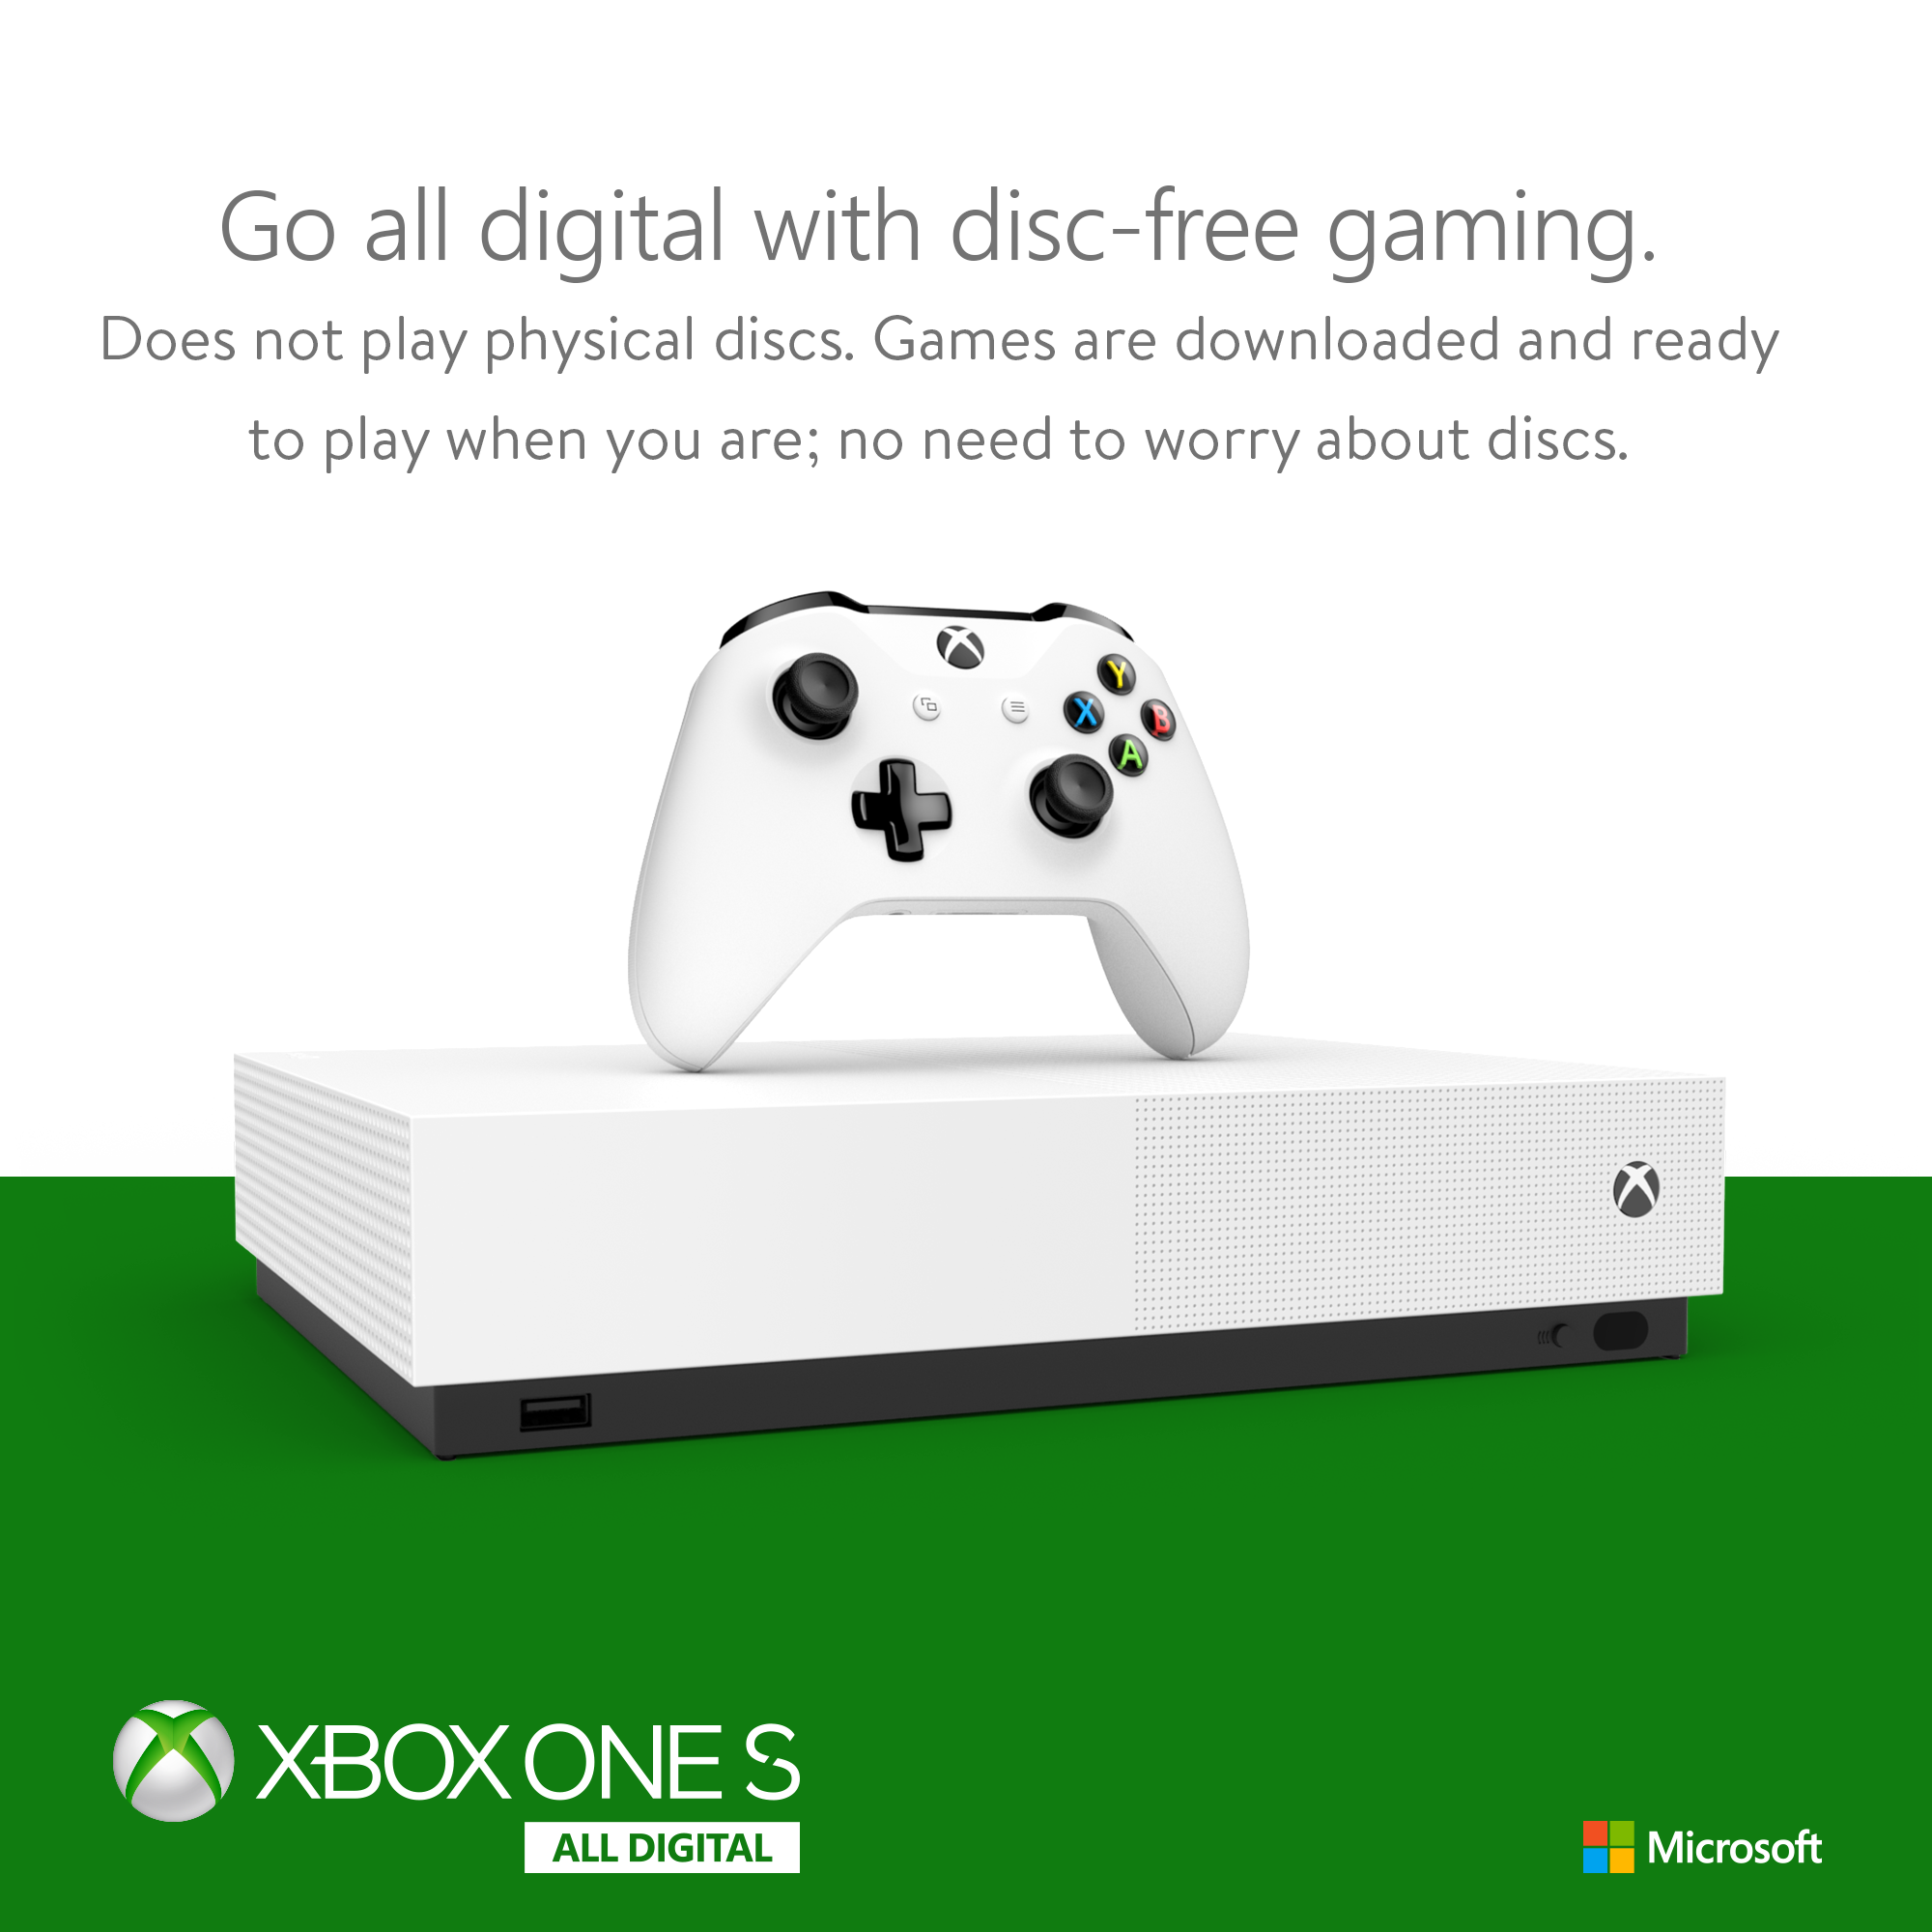 Microsoft Xbox One S 1TB All Digital Edition 3 Game Bundle (Disc-free Gaming), White, NJP-00050 - image 4 of 13